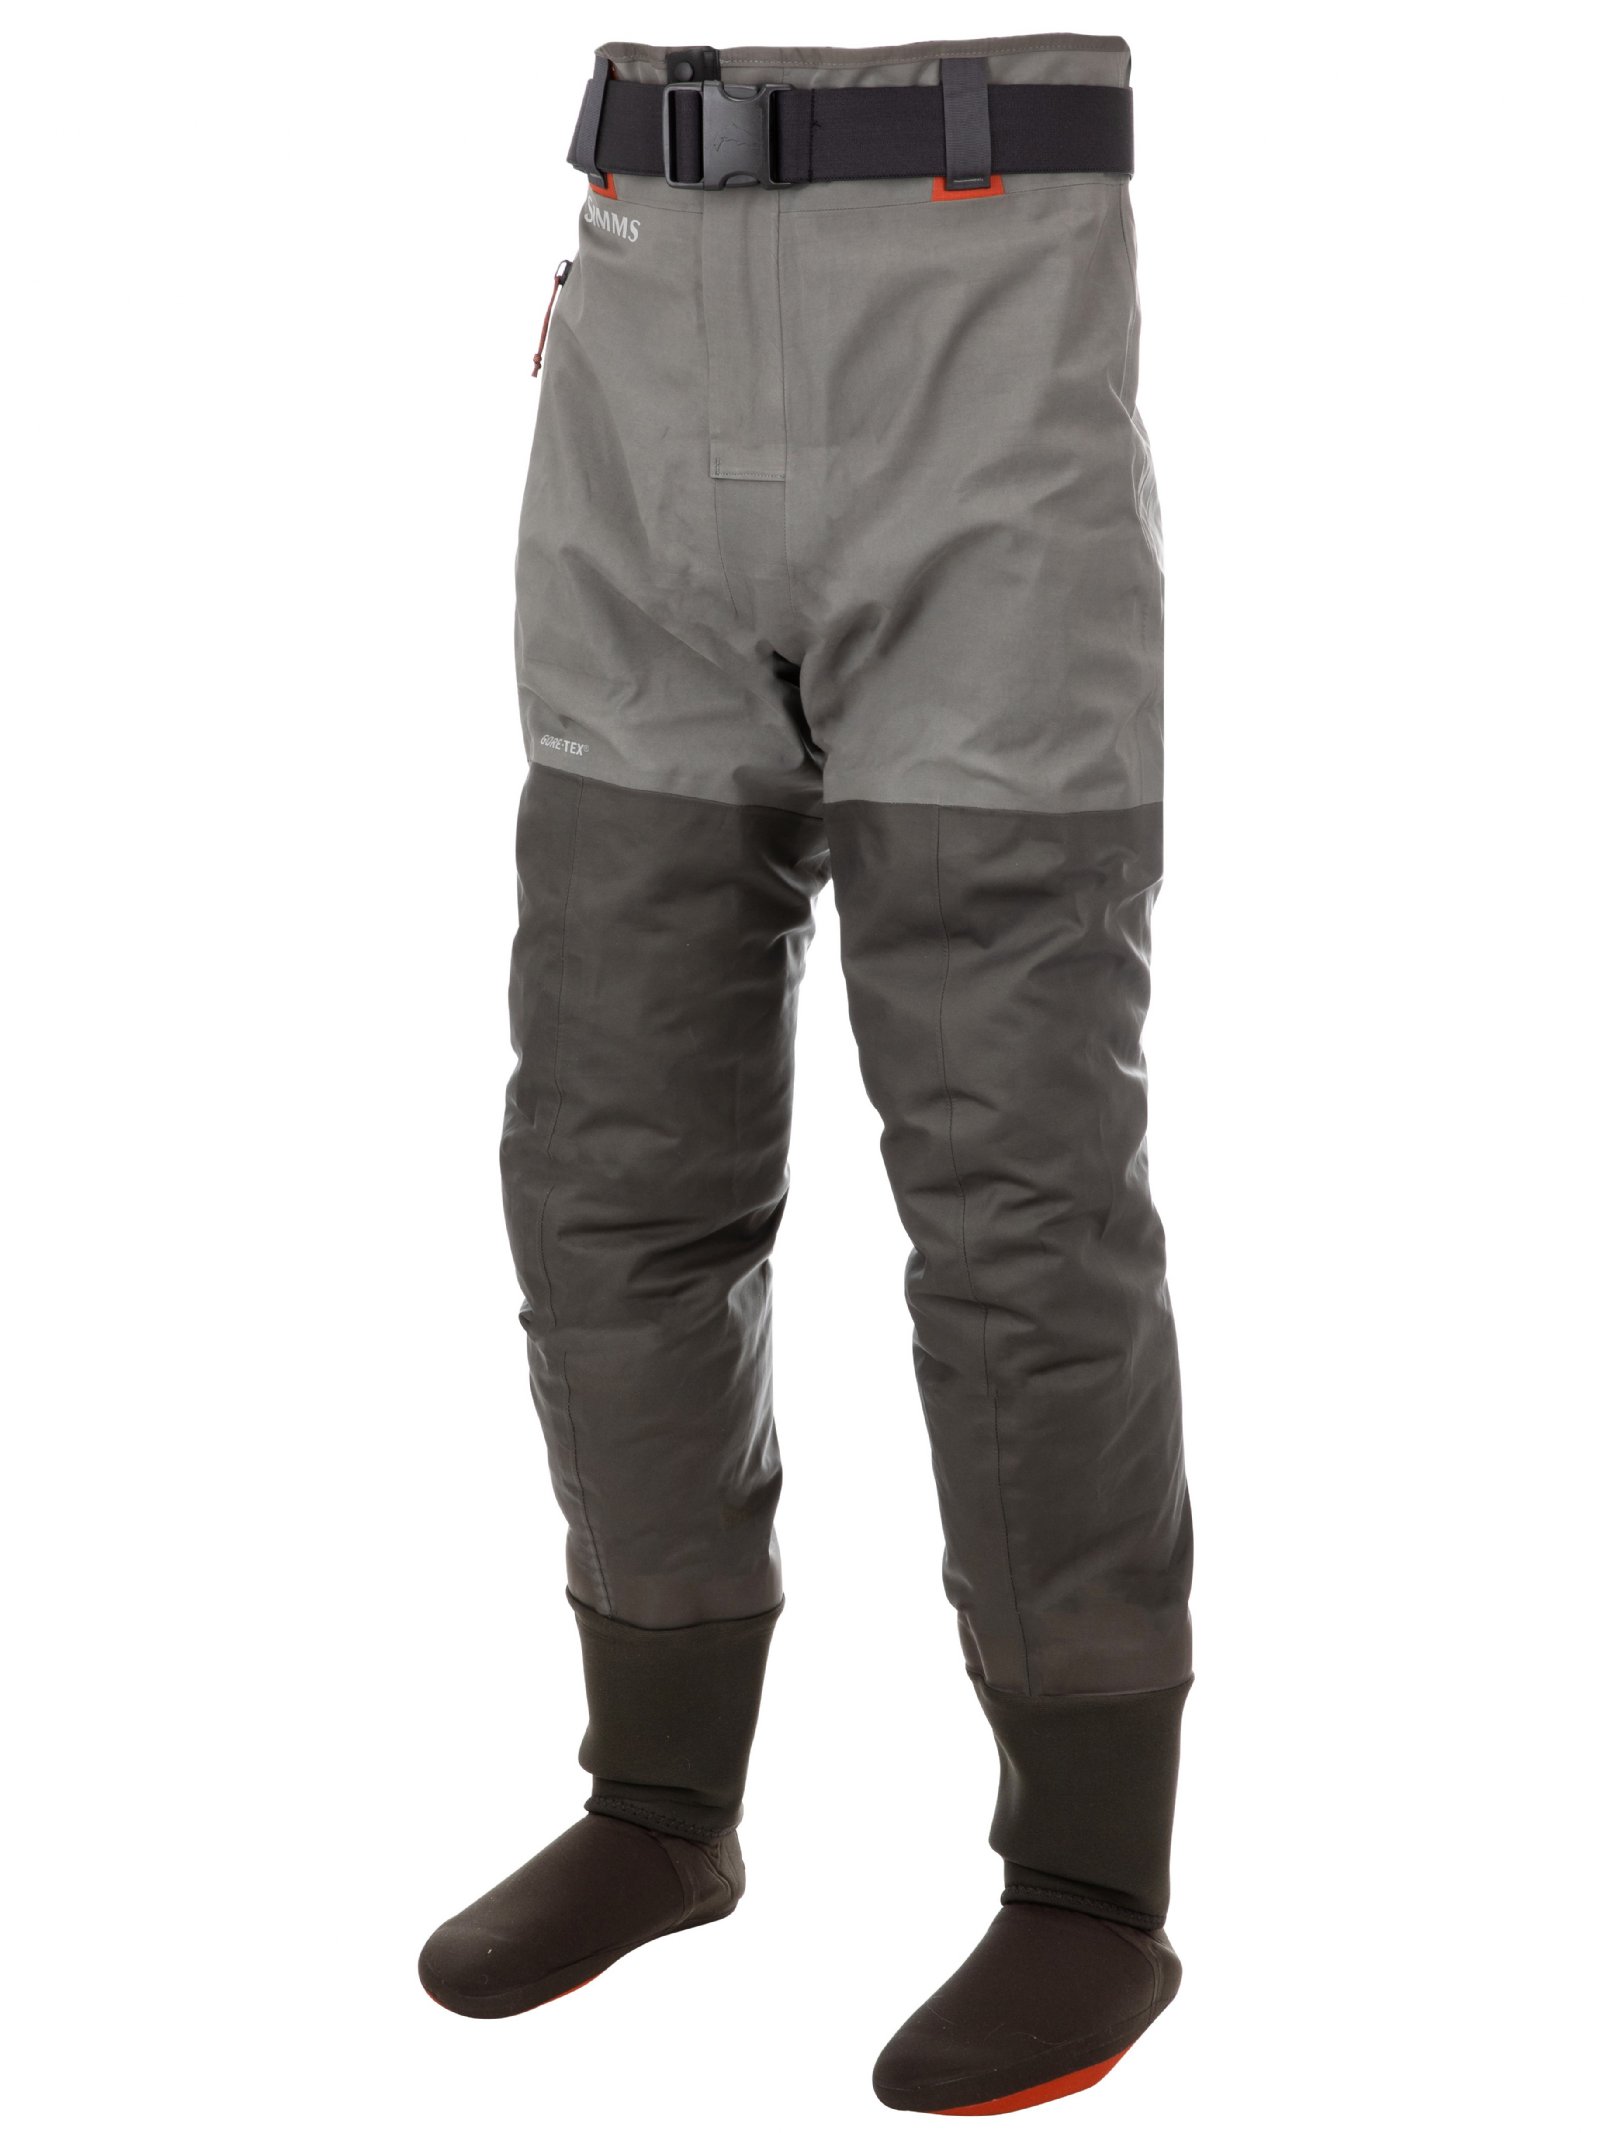 Simms M's G3 Guide Wading Pant - Large Short